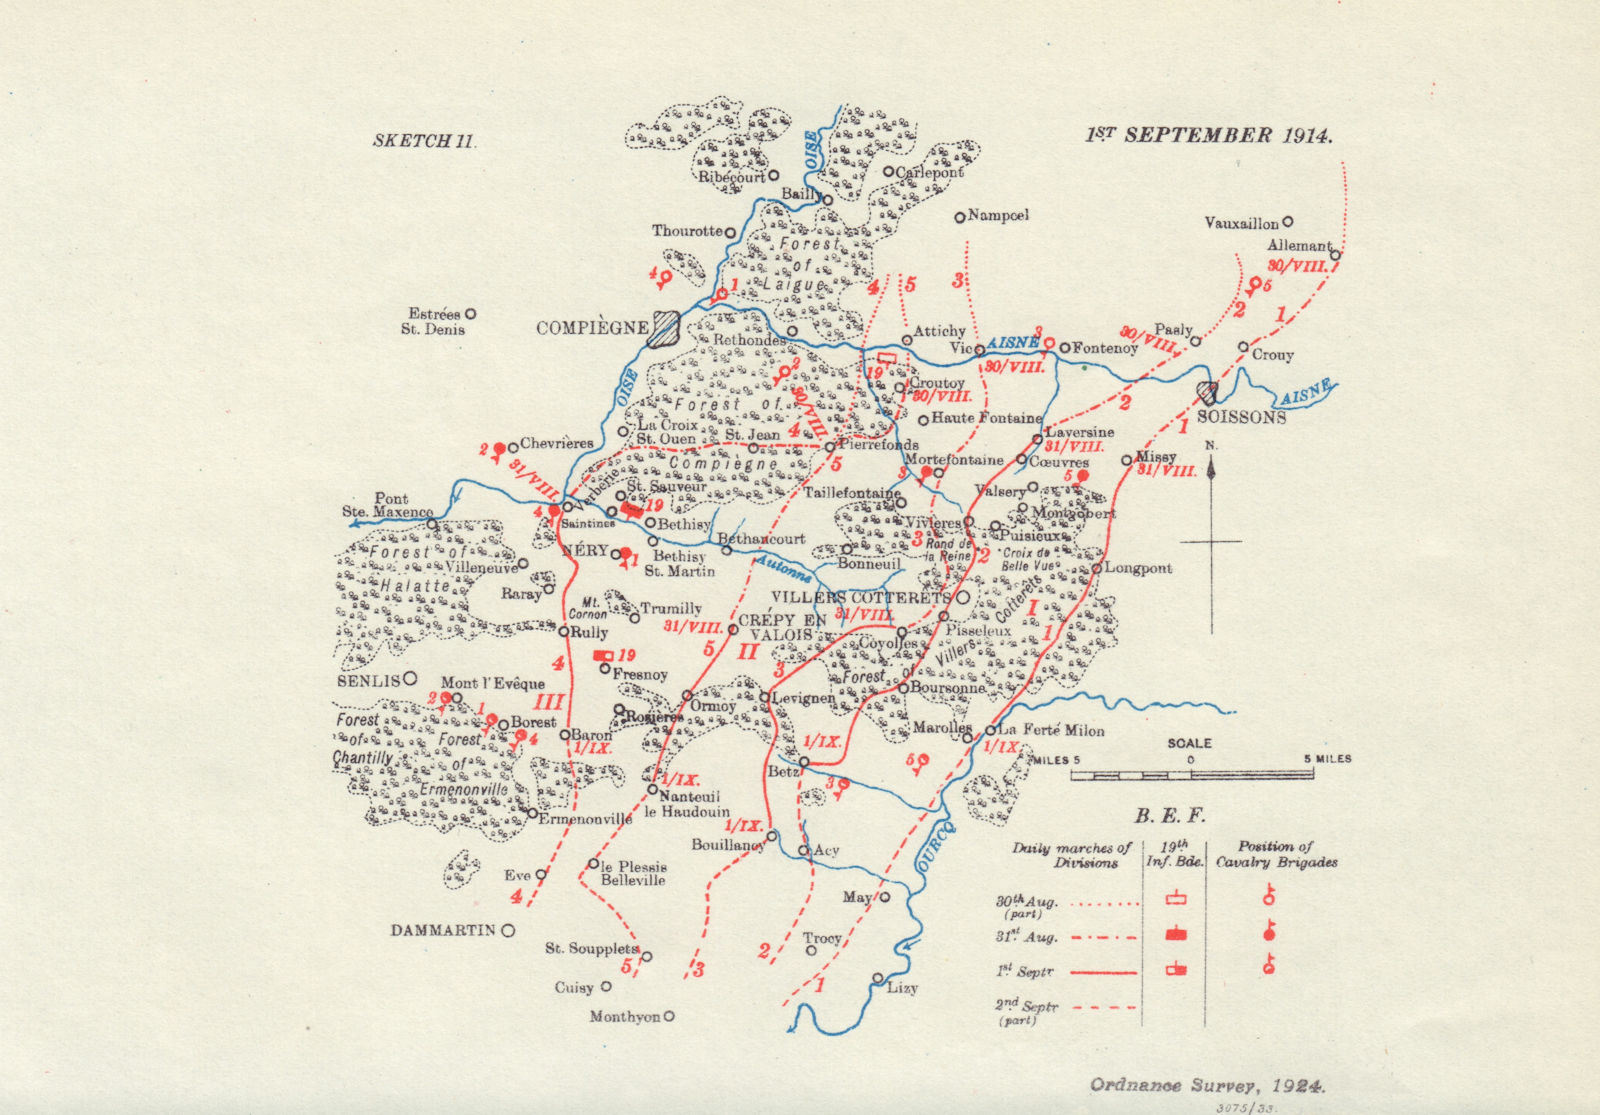 Daily marches of B.E.F. 1st September 1914. Western Front. WW1. 1933 old map